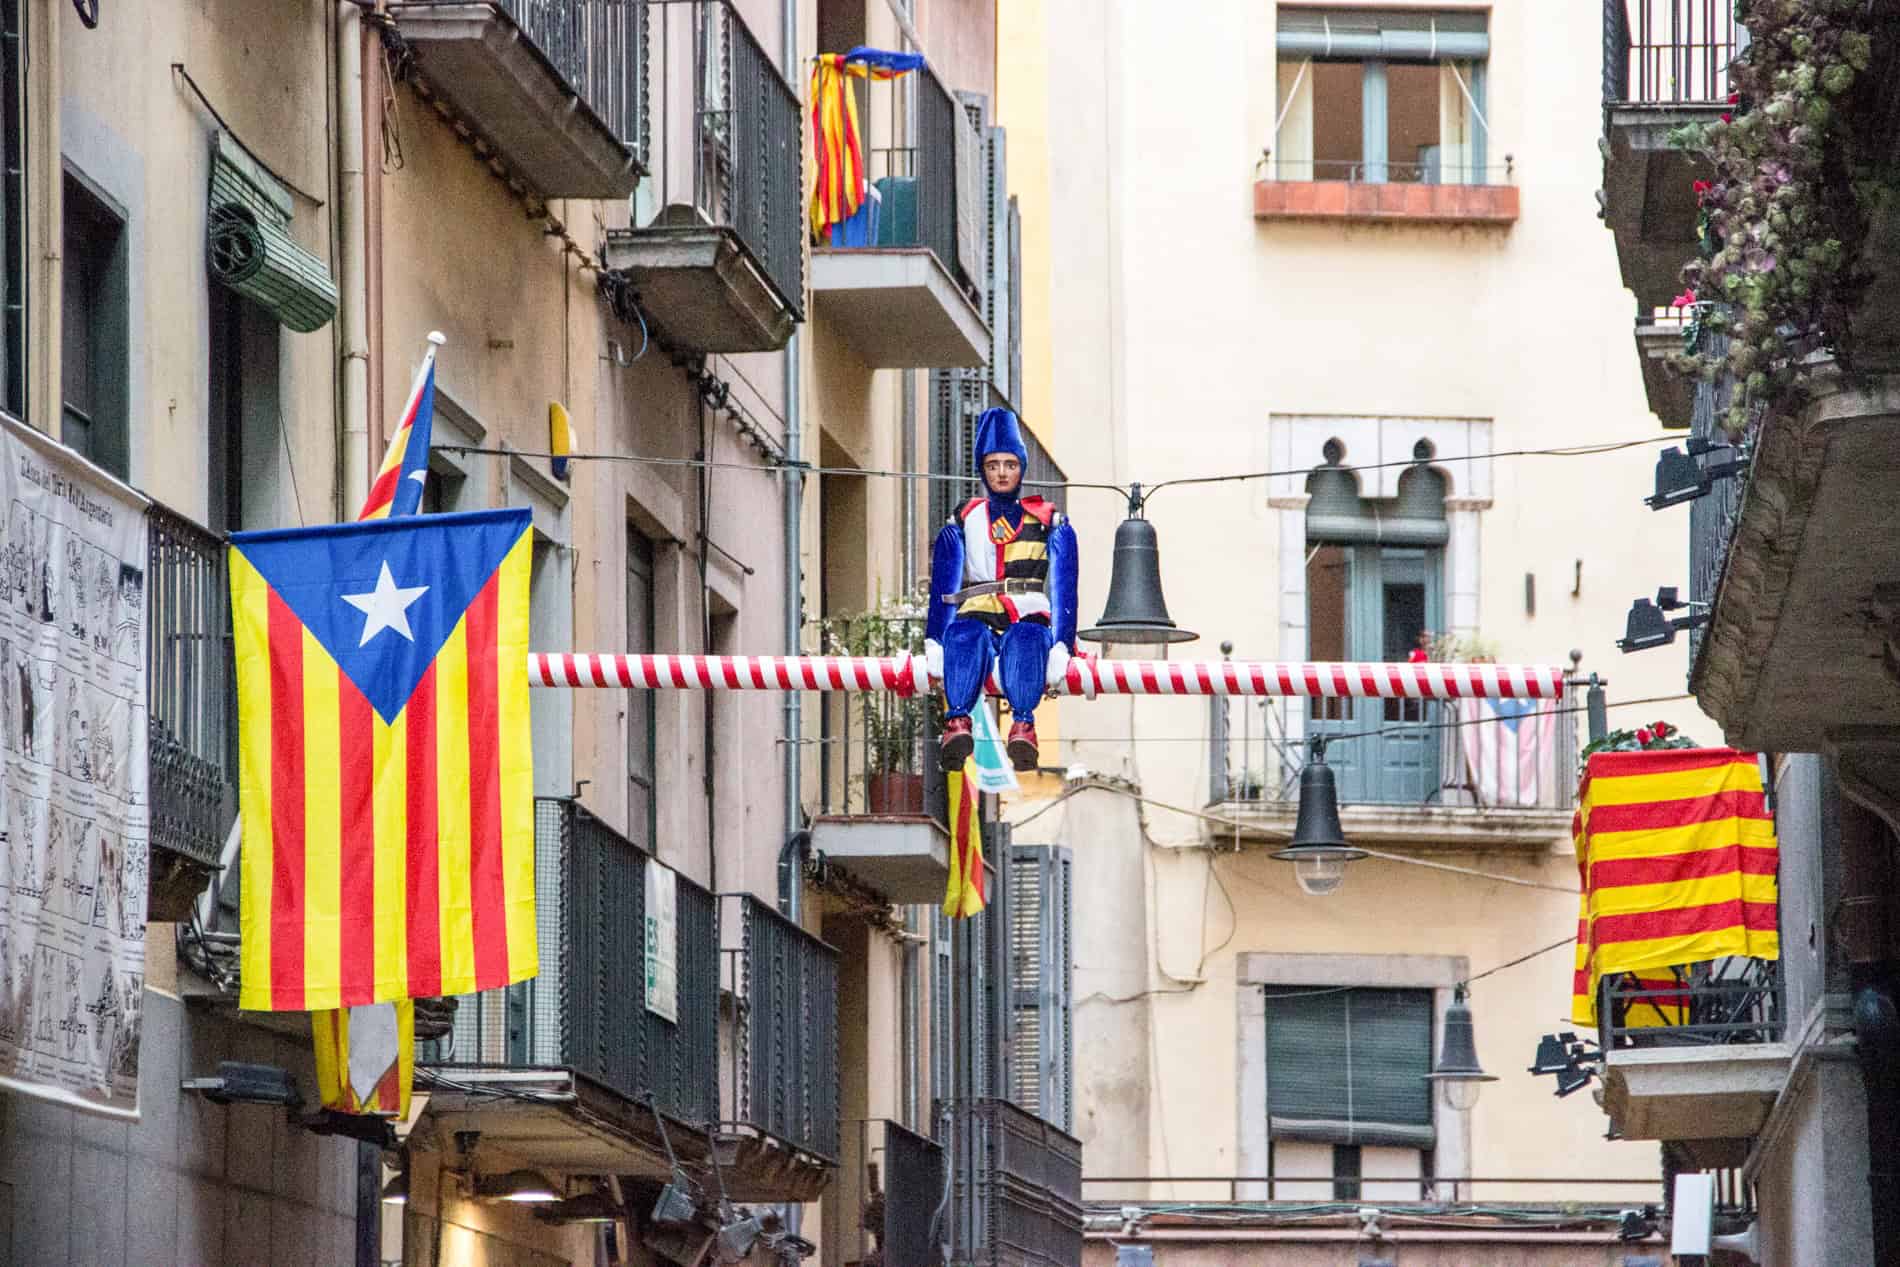 A jester figure dressed in blue and four Catalonia flags hangs from balconies in Girona city, Spain.